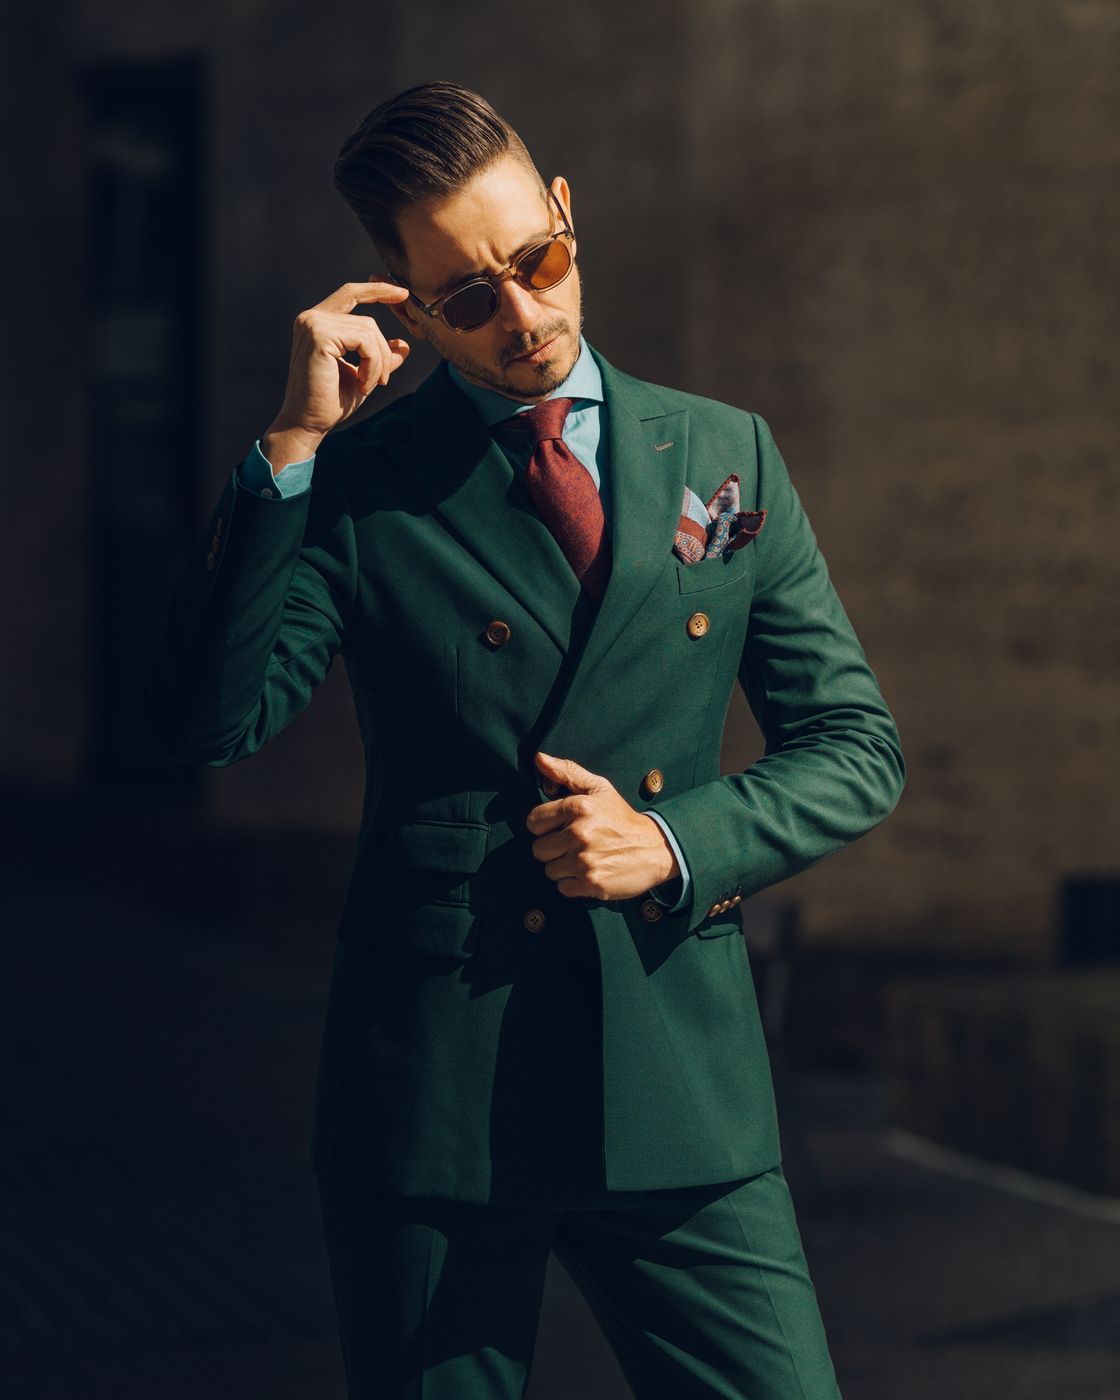 Double breasted suit jacket